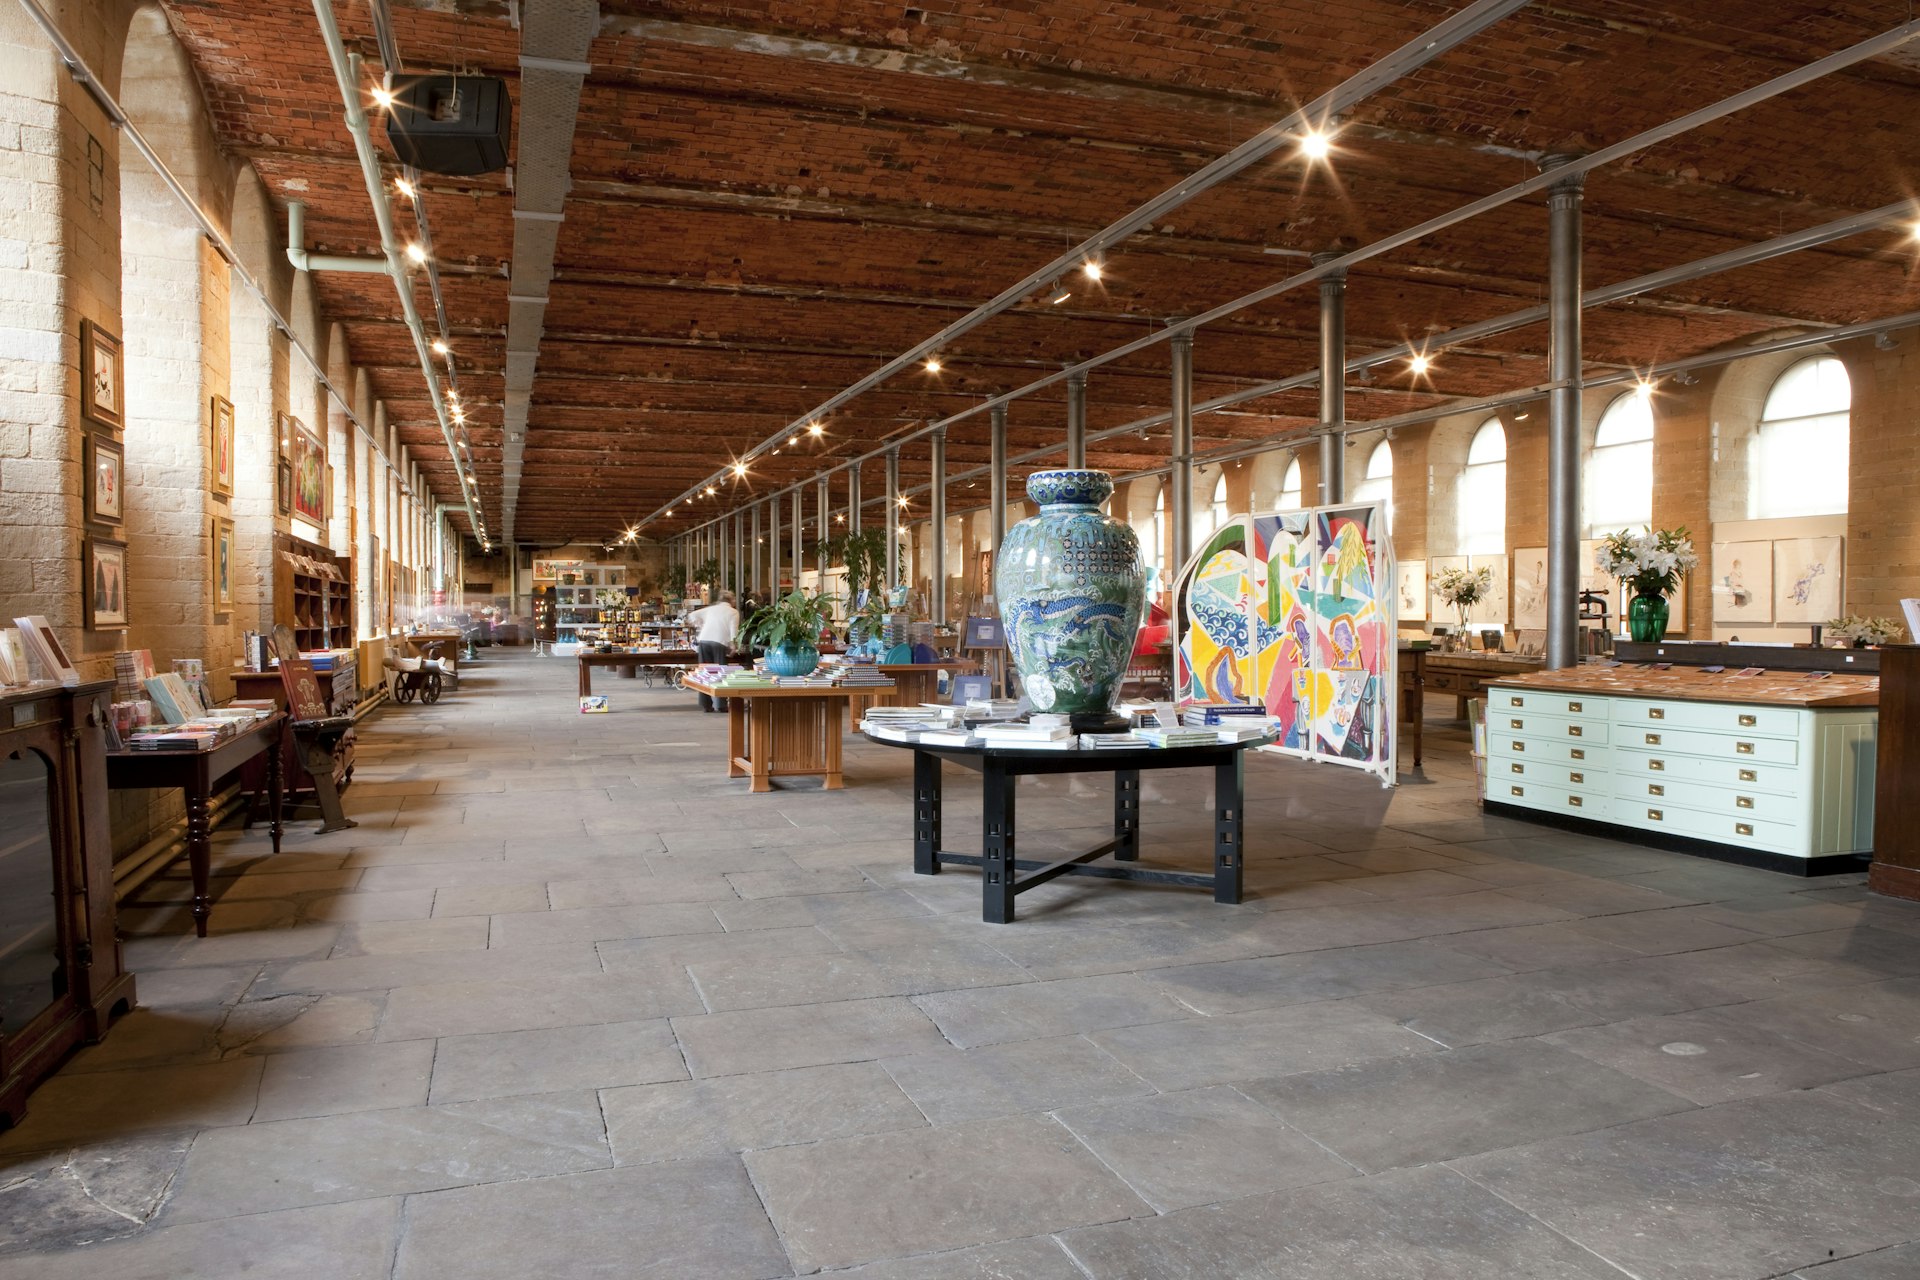 The minimalist interior of a vast, long room at Salts Mill in Saltire; the room has floor-to-ceiling arched windows running each side and is filled with tables displaying artworks, books and other items.